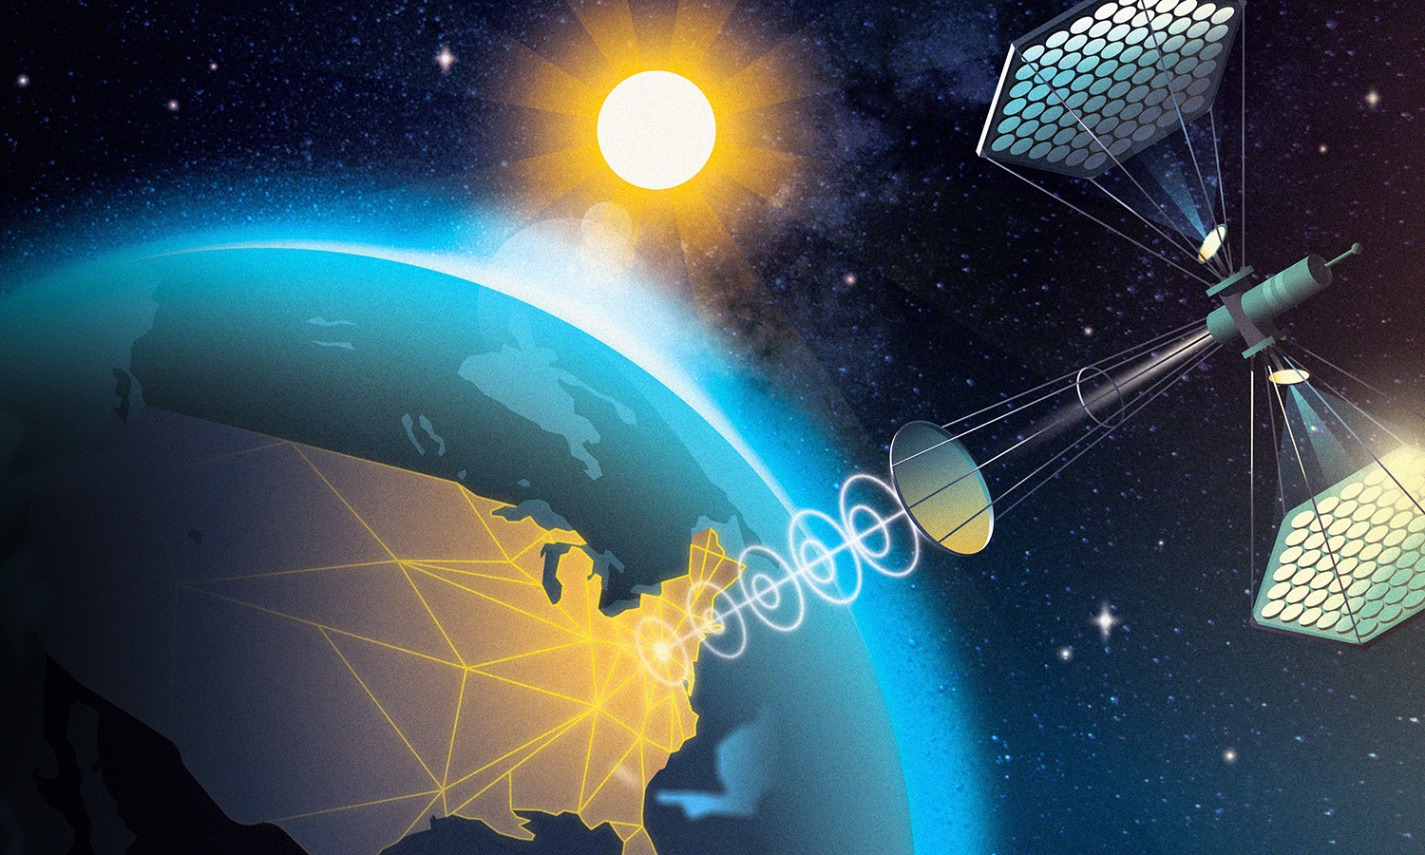 Learn How Solar Panels in Space Could Power the Earth